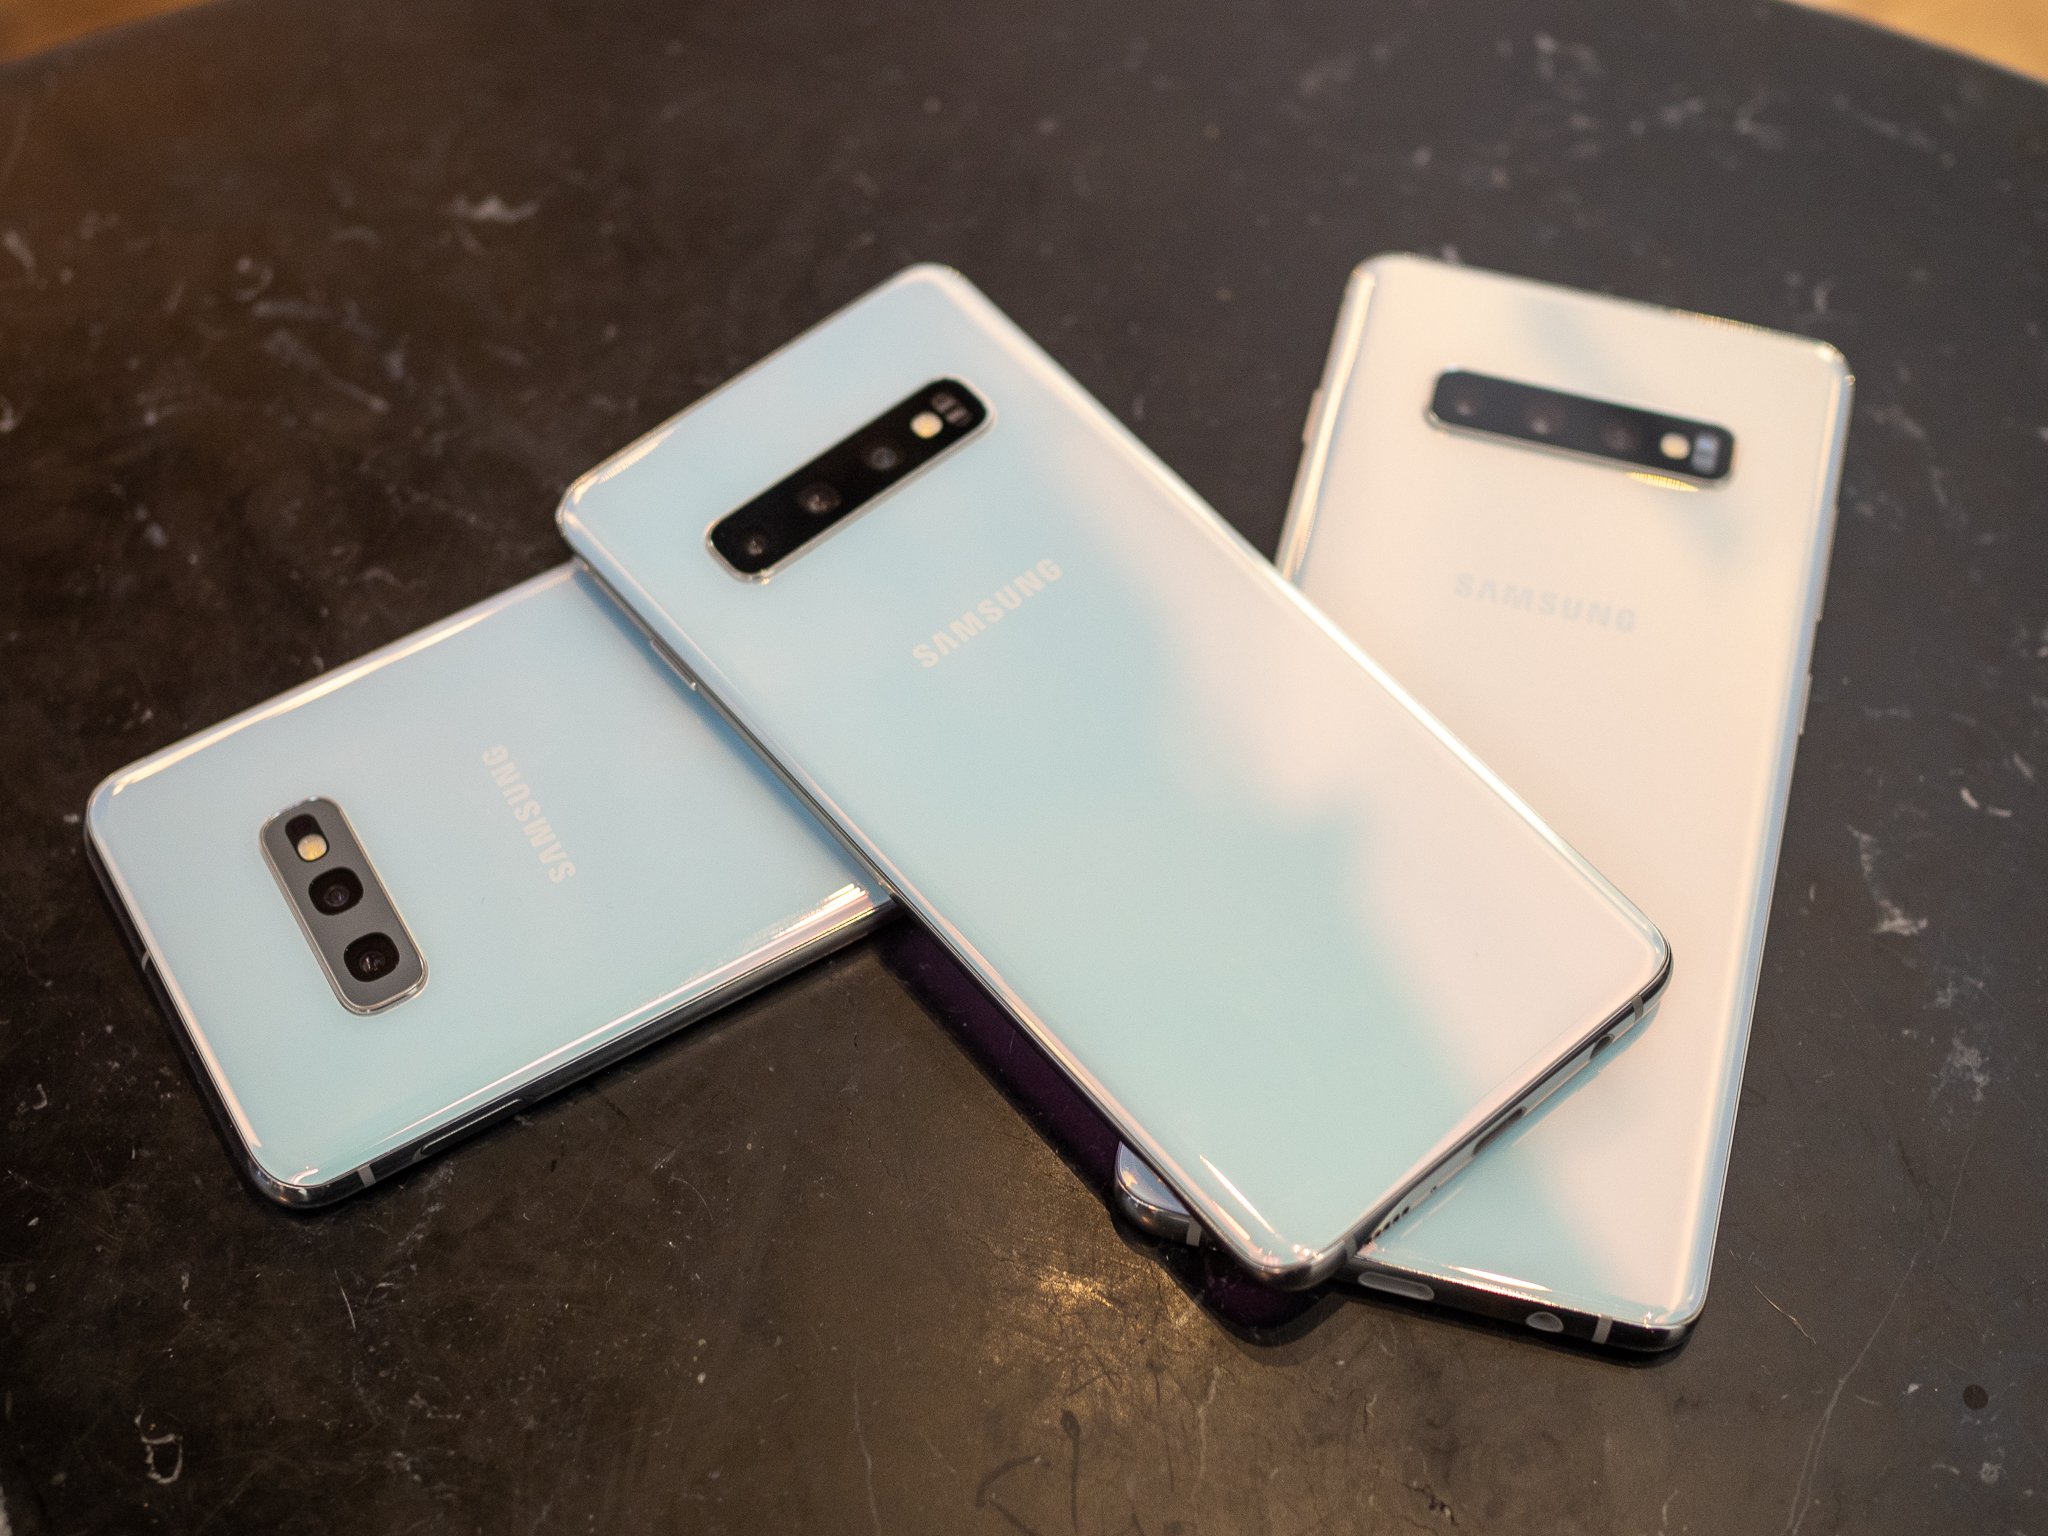 https://www.androidcentral.com/sites/androidcentral.com/files/styles/large_wm_brw/public/article_images/2019/02/galaxy-s10-s10-plus-s10e-all-white.jpg?itok=8GTfnJU6